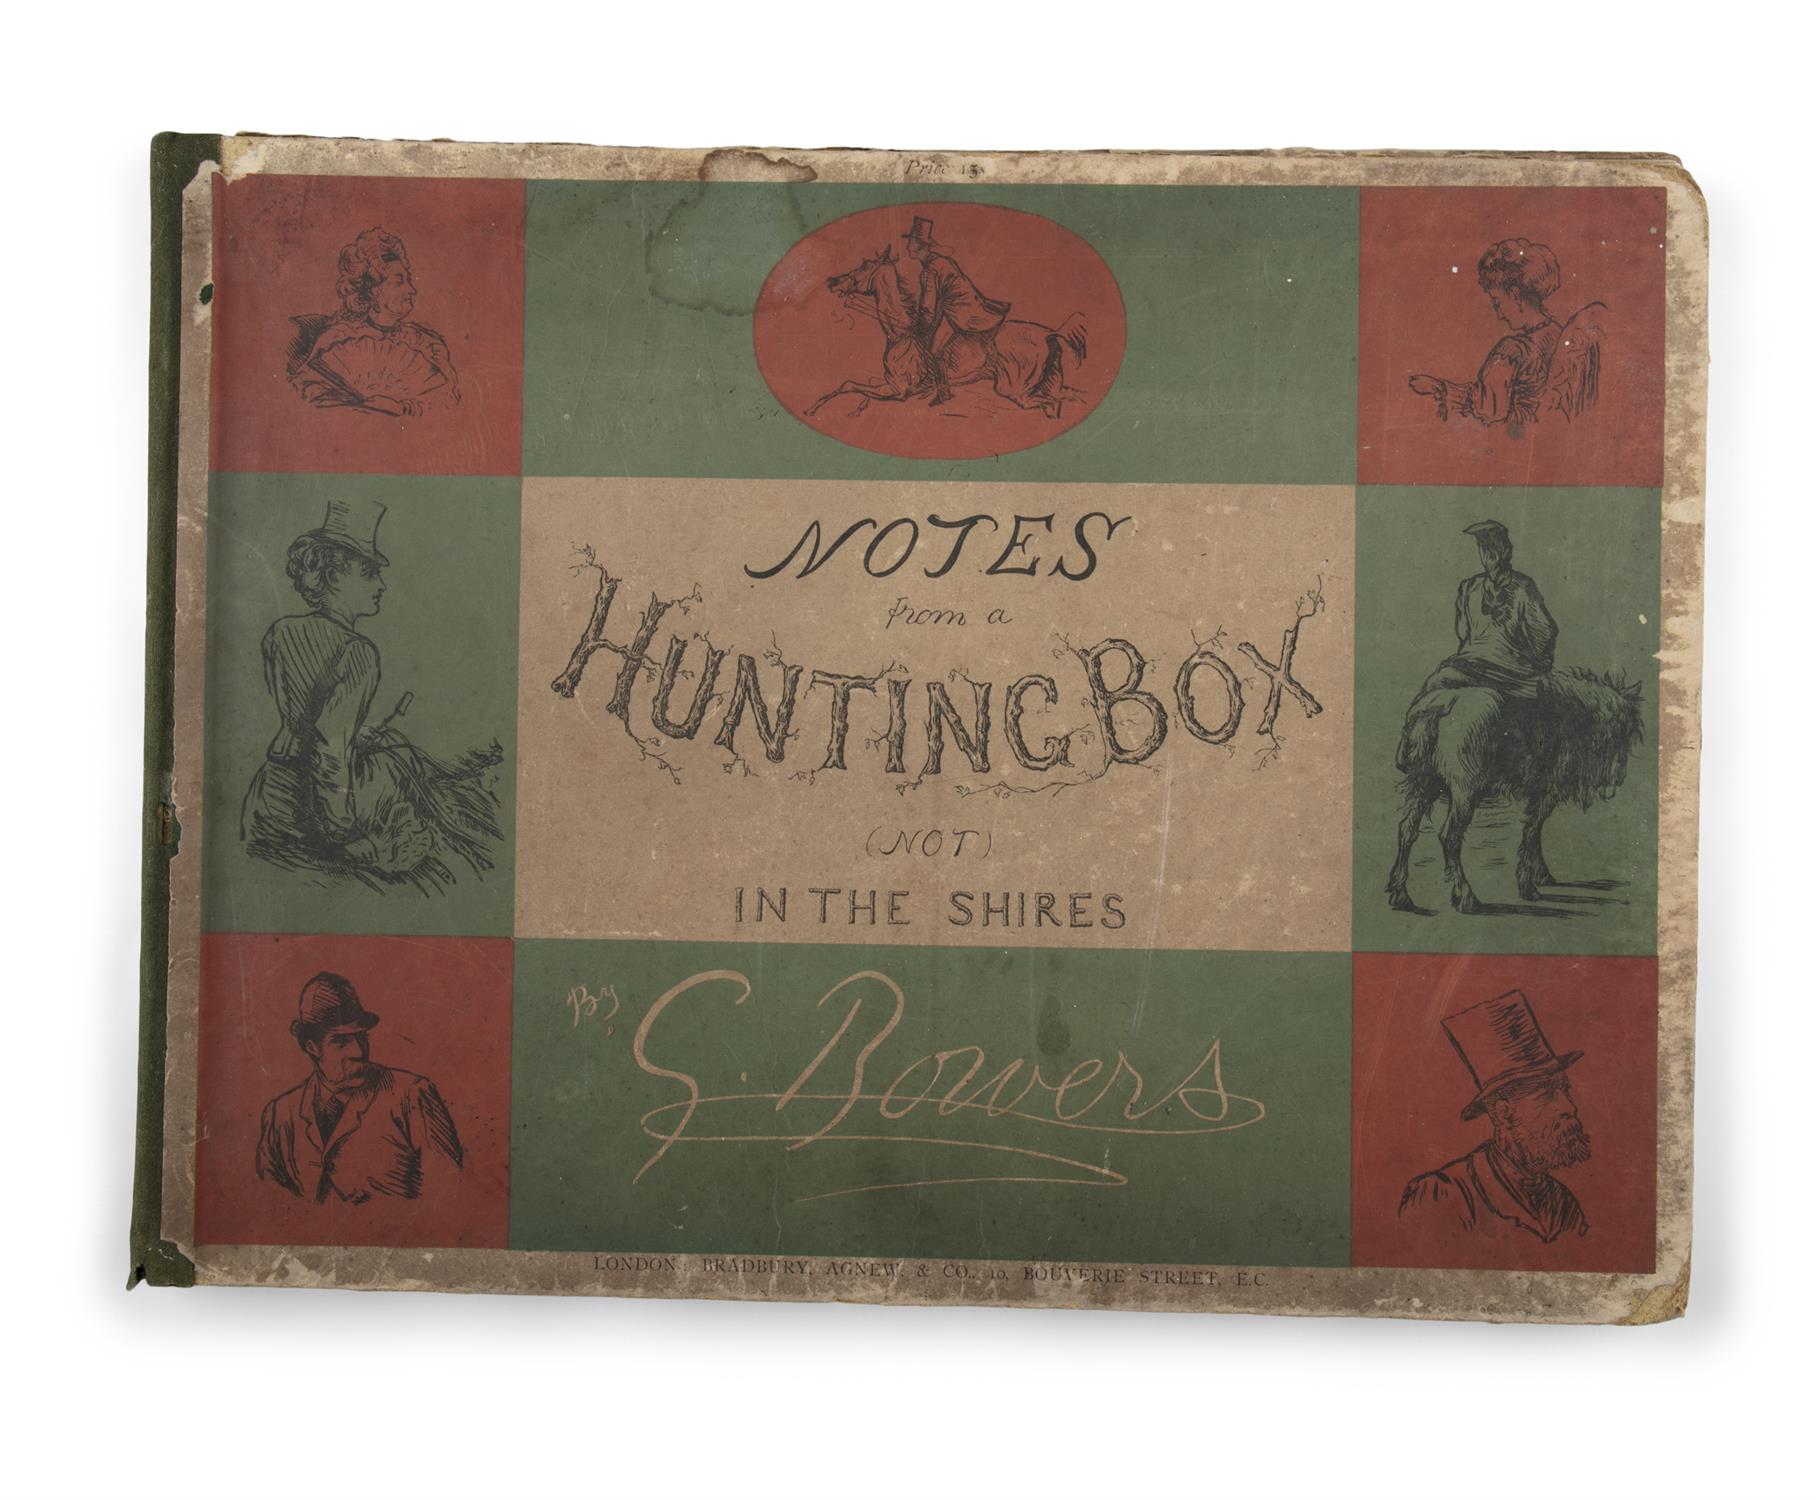 G. BOWERS Notes from a Hunting Box, (not) in the Shires, oblong folio folio, London